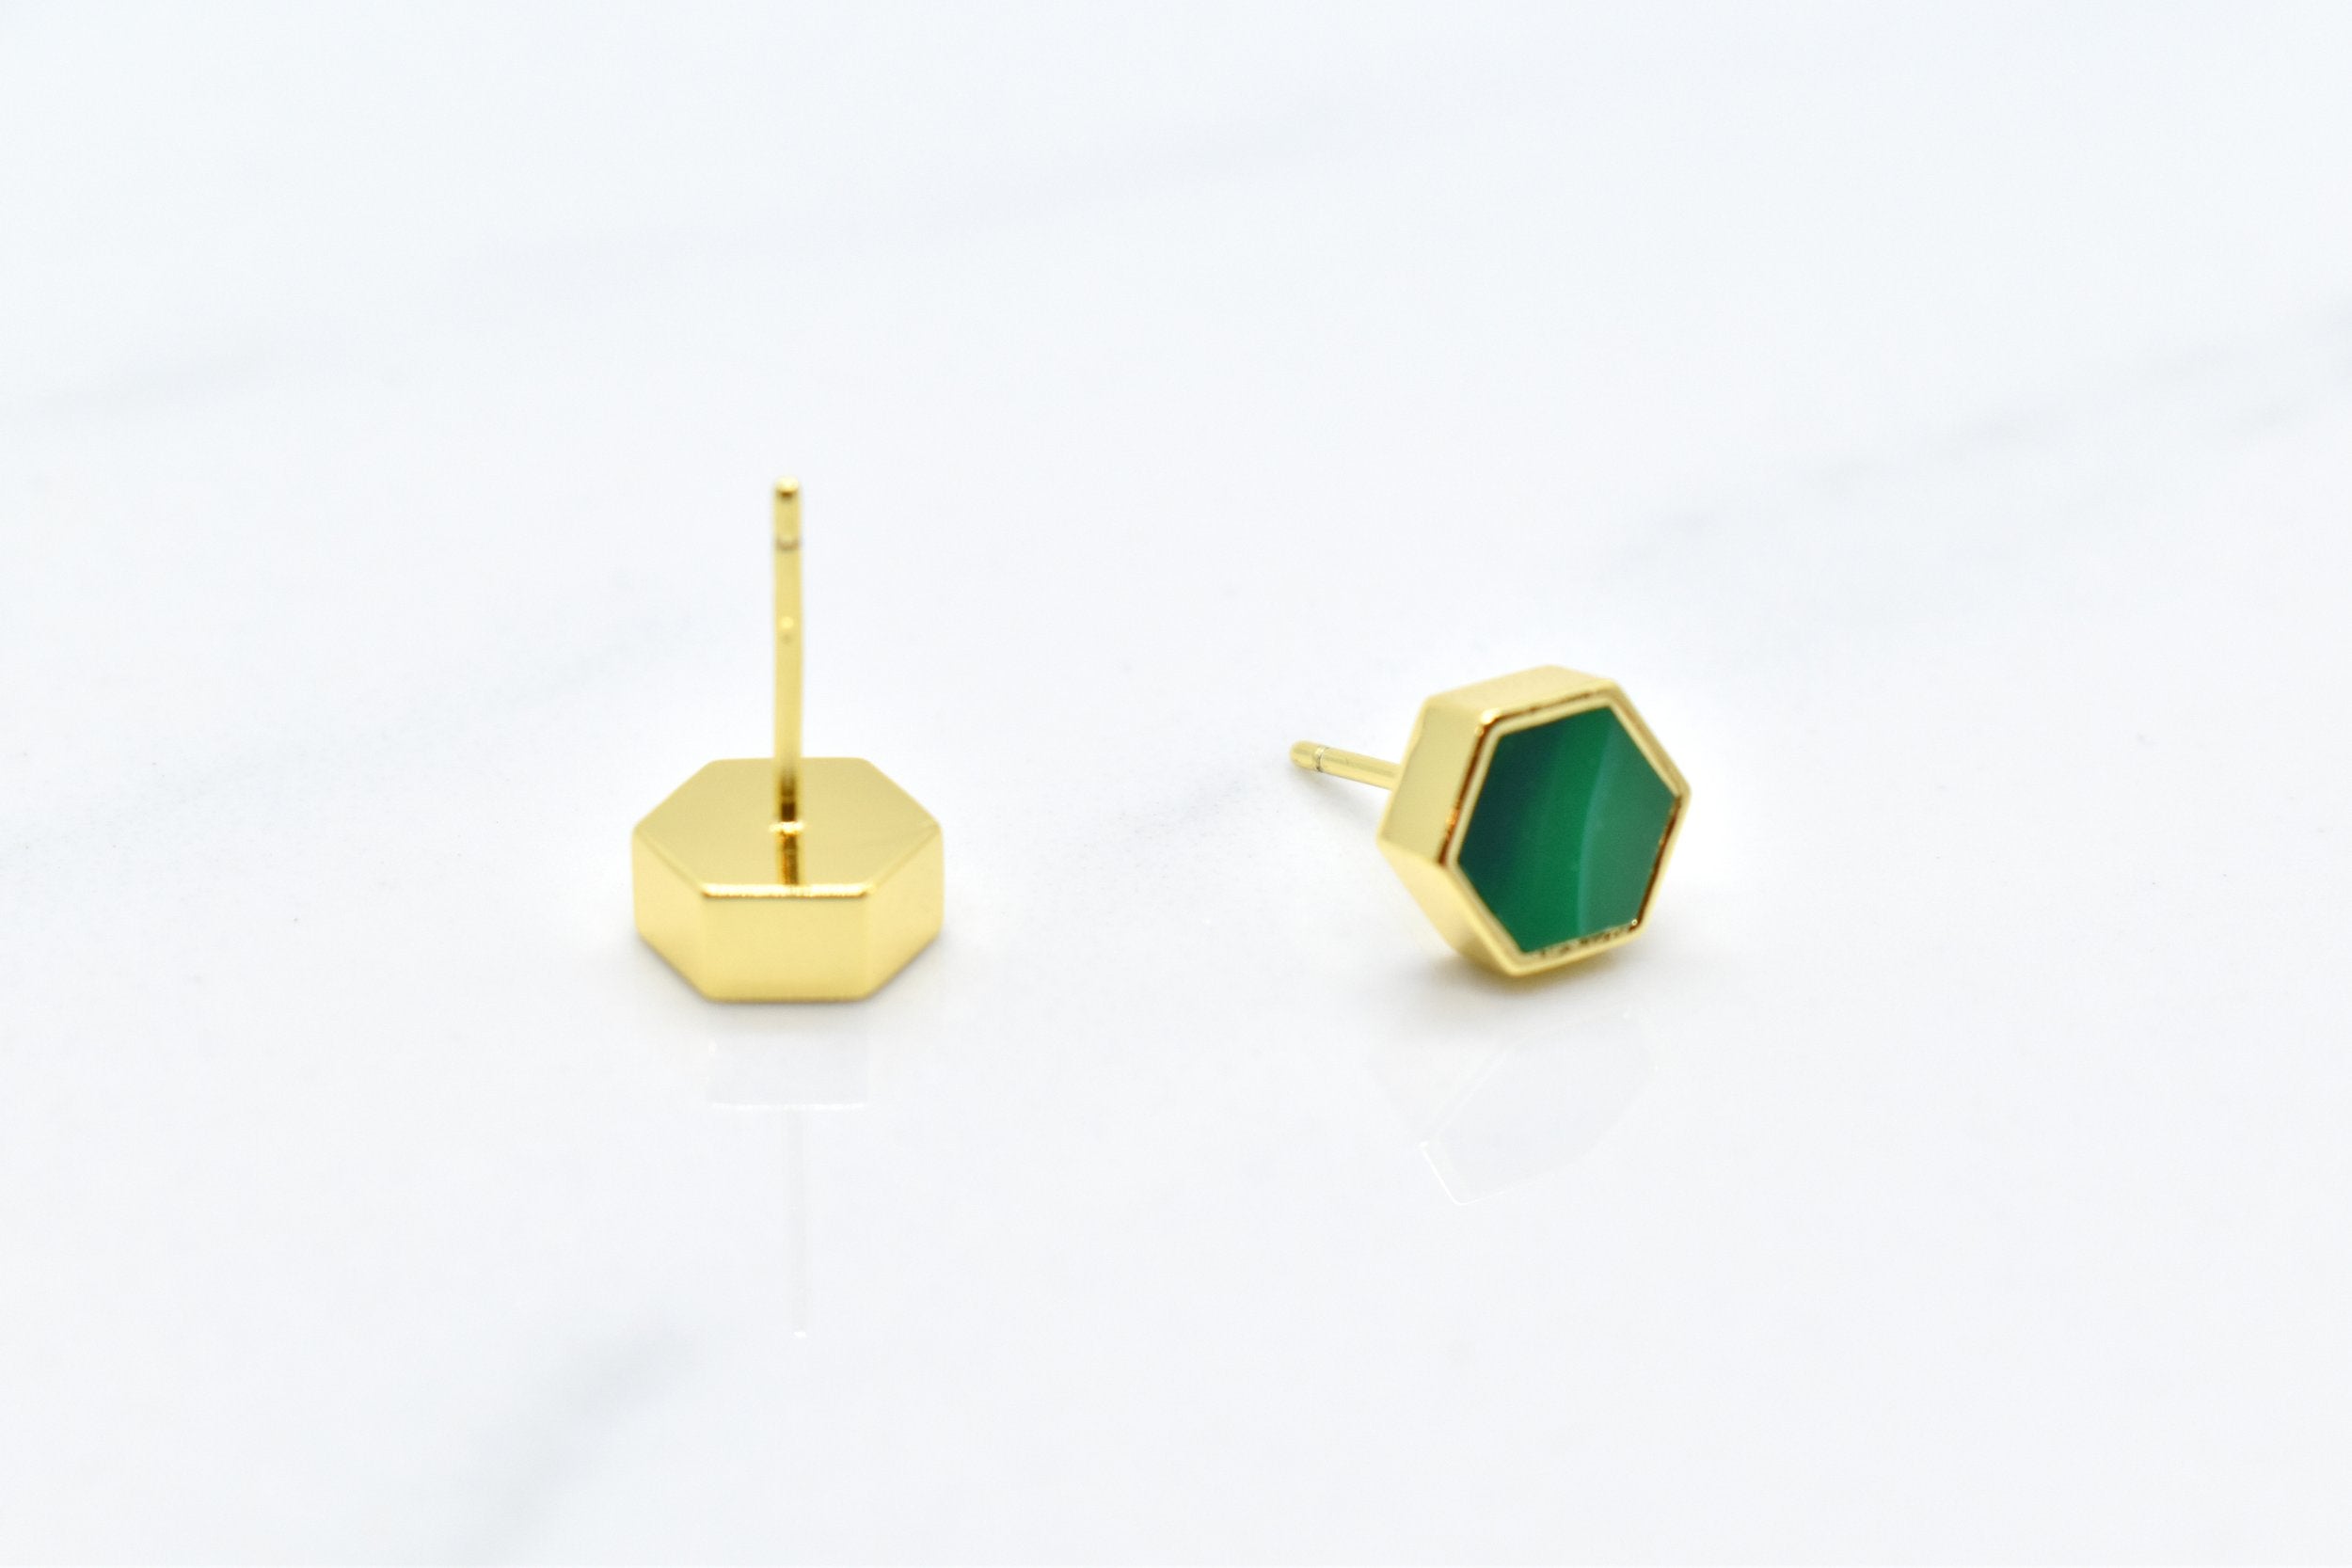 gold hexagon studs with back of stud and sterling silver posts that are hypoallergenic shown against a white background, includes 14k gold plated earrings with emerald gem clay